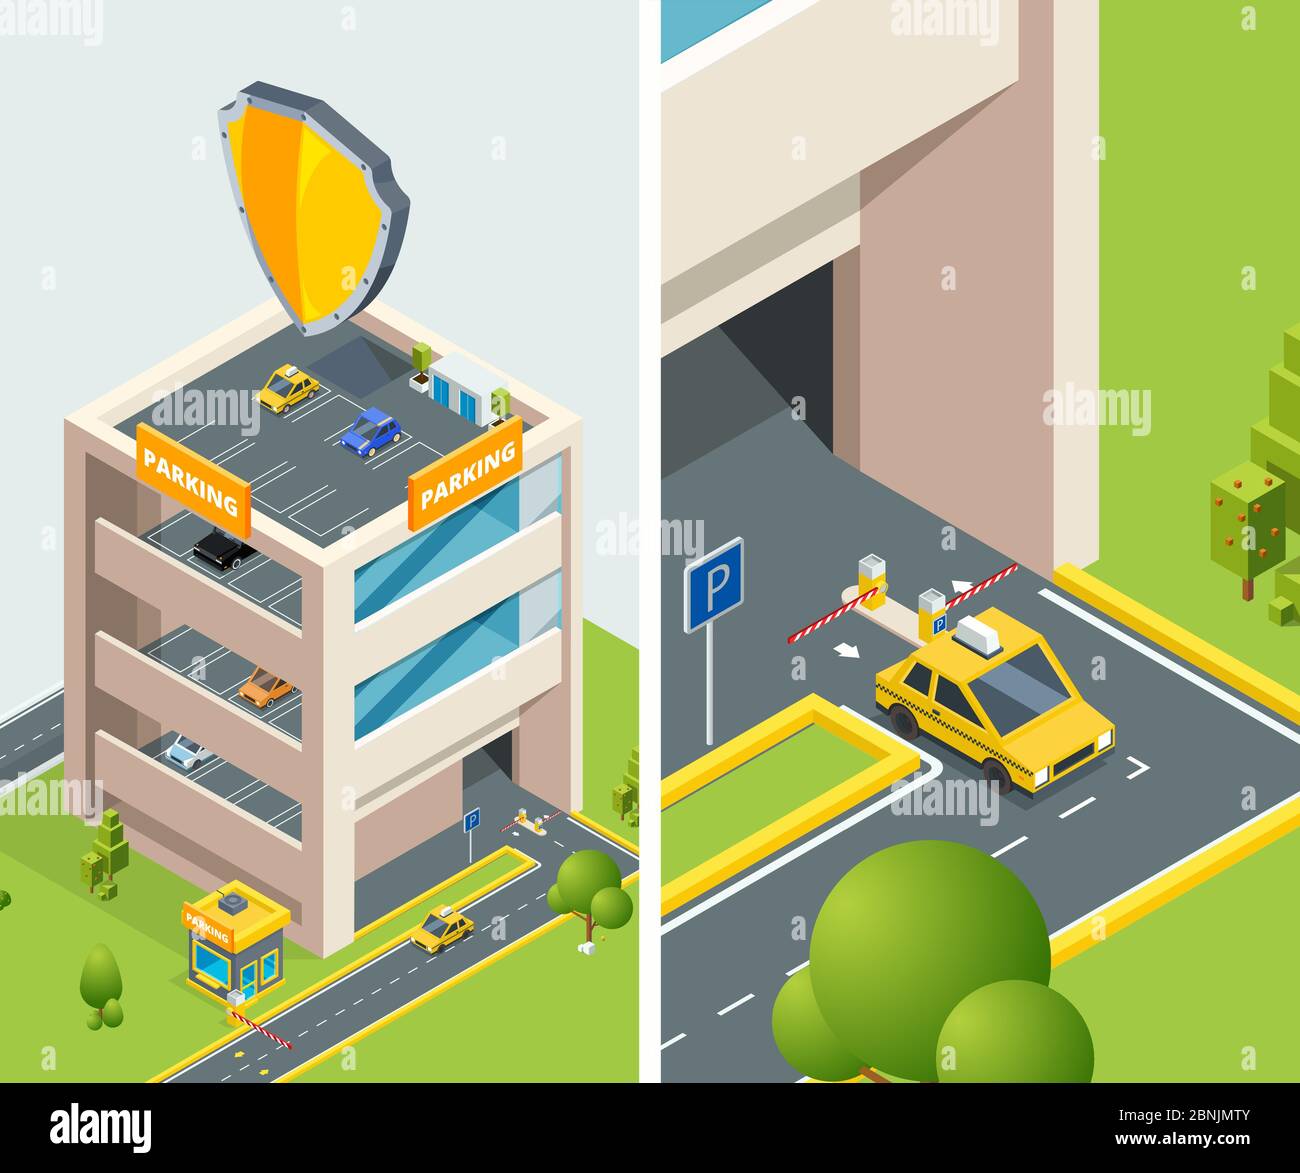 Background isometric illustration of multi level parking with various cars Stock Vector